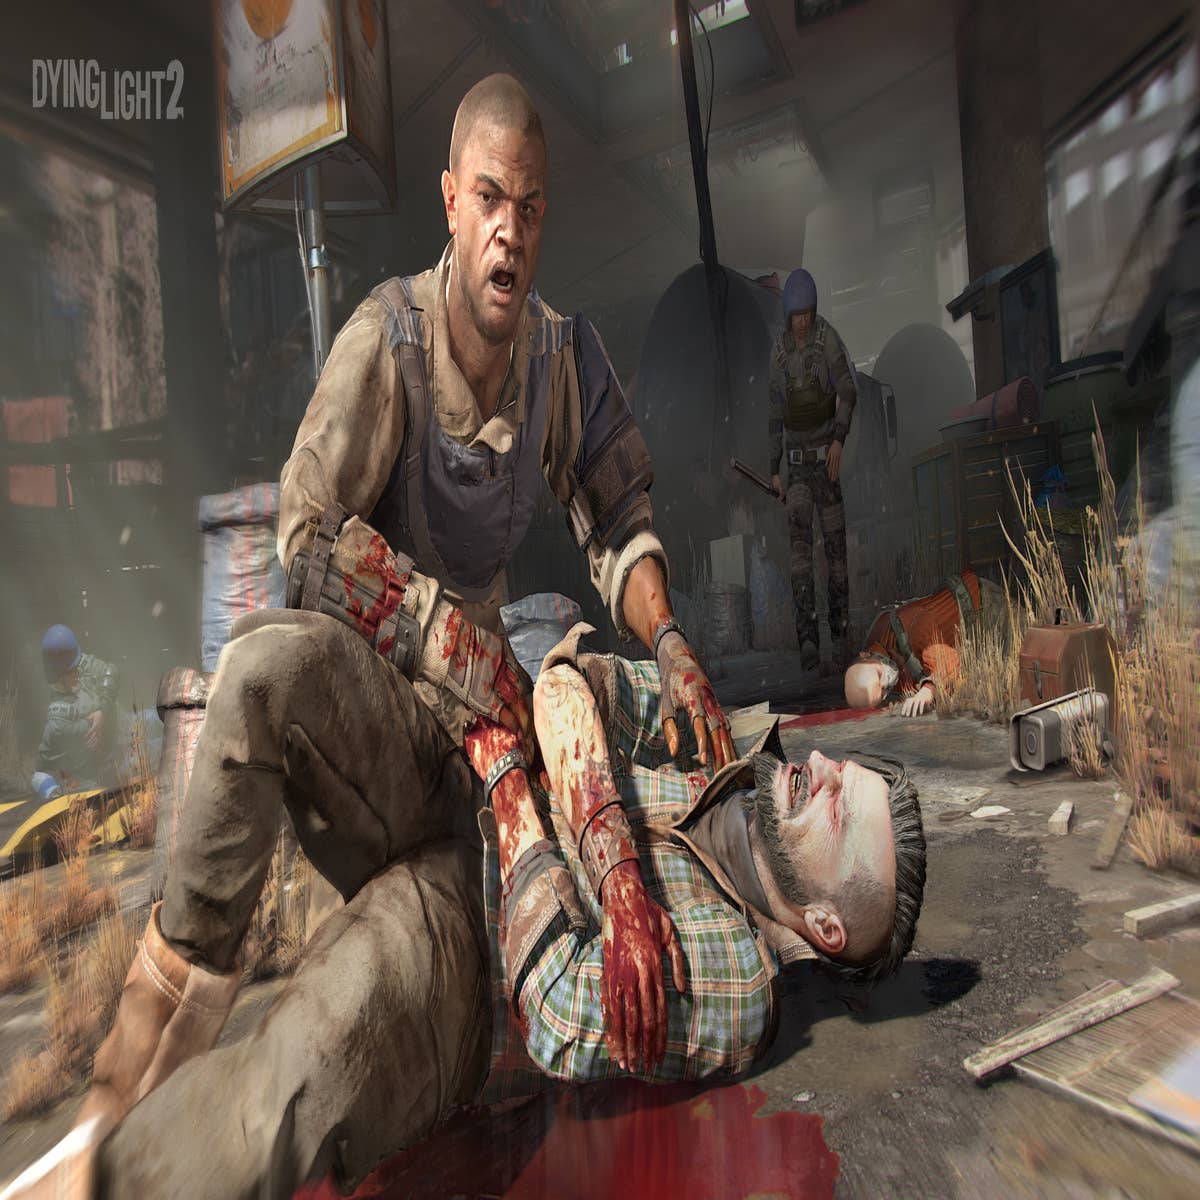 Dying Light 2' Bigger, Scarier, More Parkour Than First